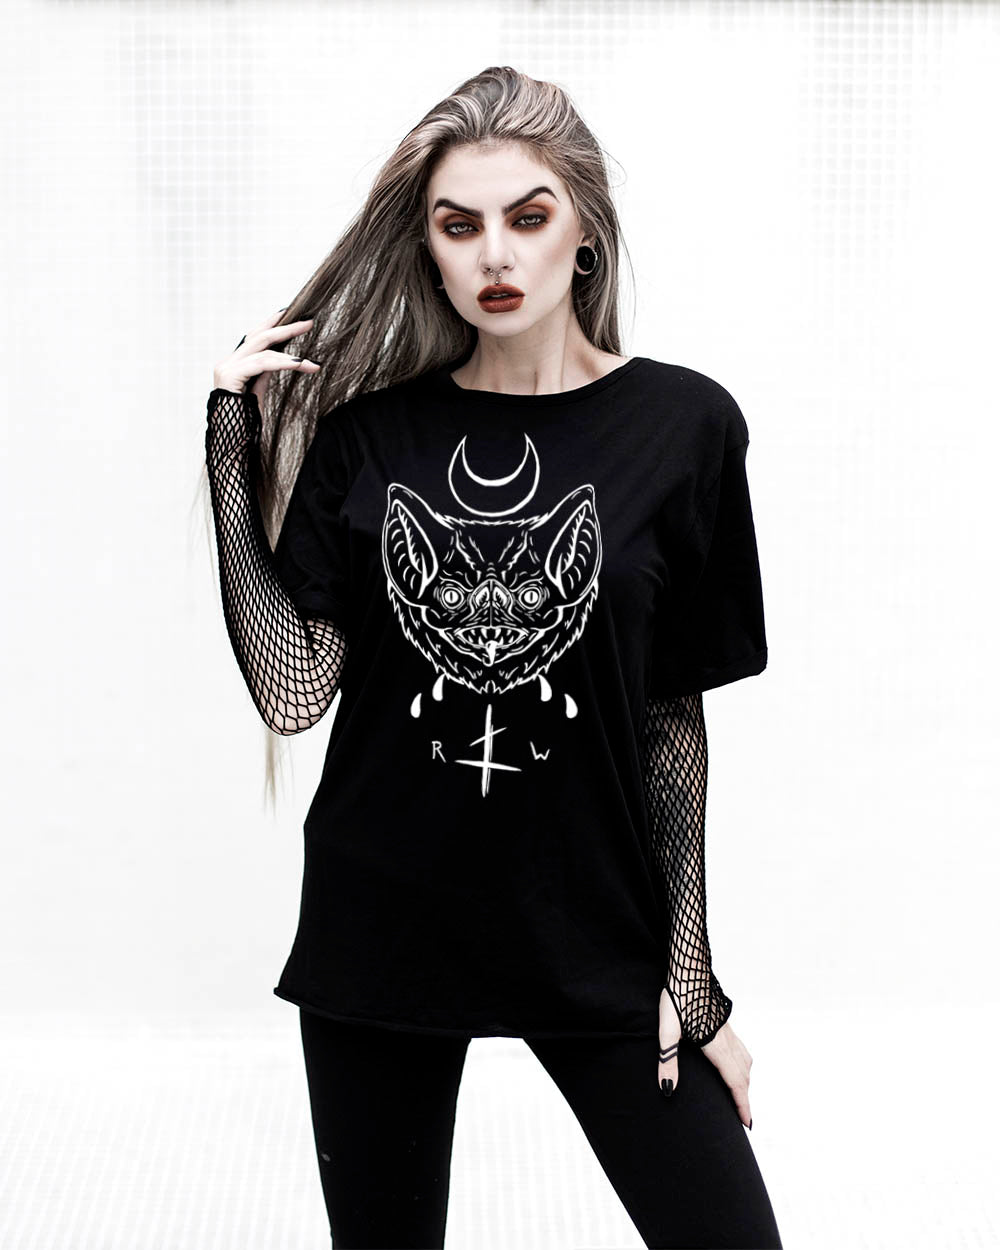 Bat Face Tee - Alt Goth Unisex T-Shirt Grunge Aesthetic Witchy Top Vegan Clothing Cool Fun Gifts